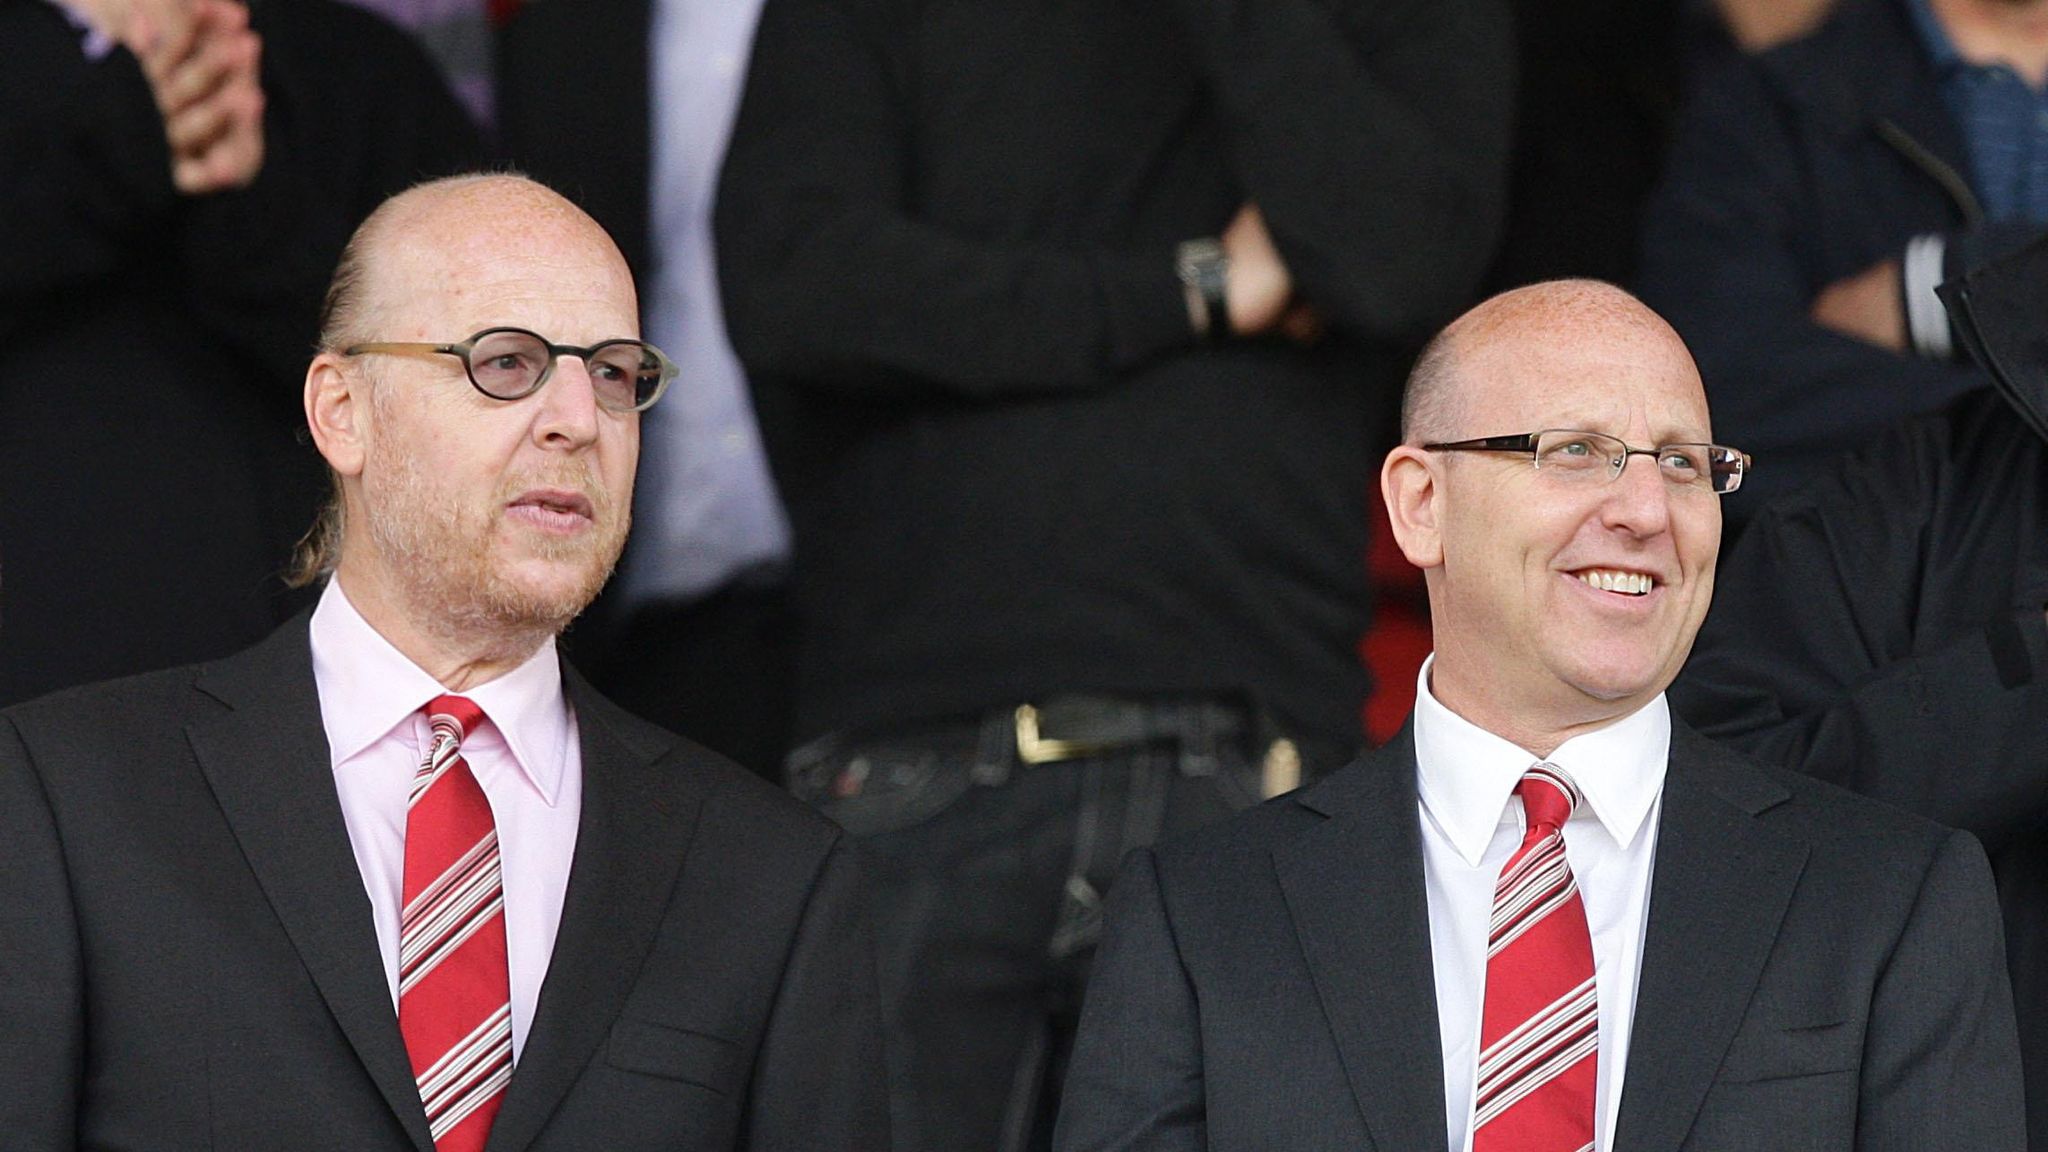 Manchester United owners Glazer family 